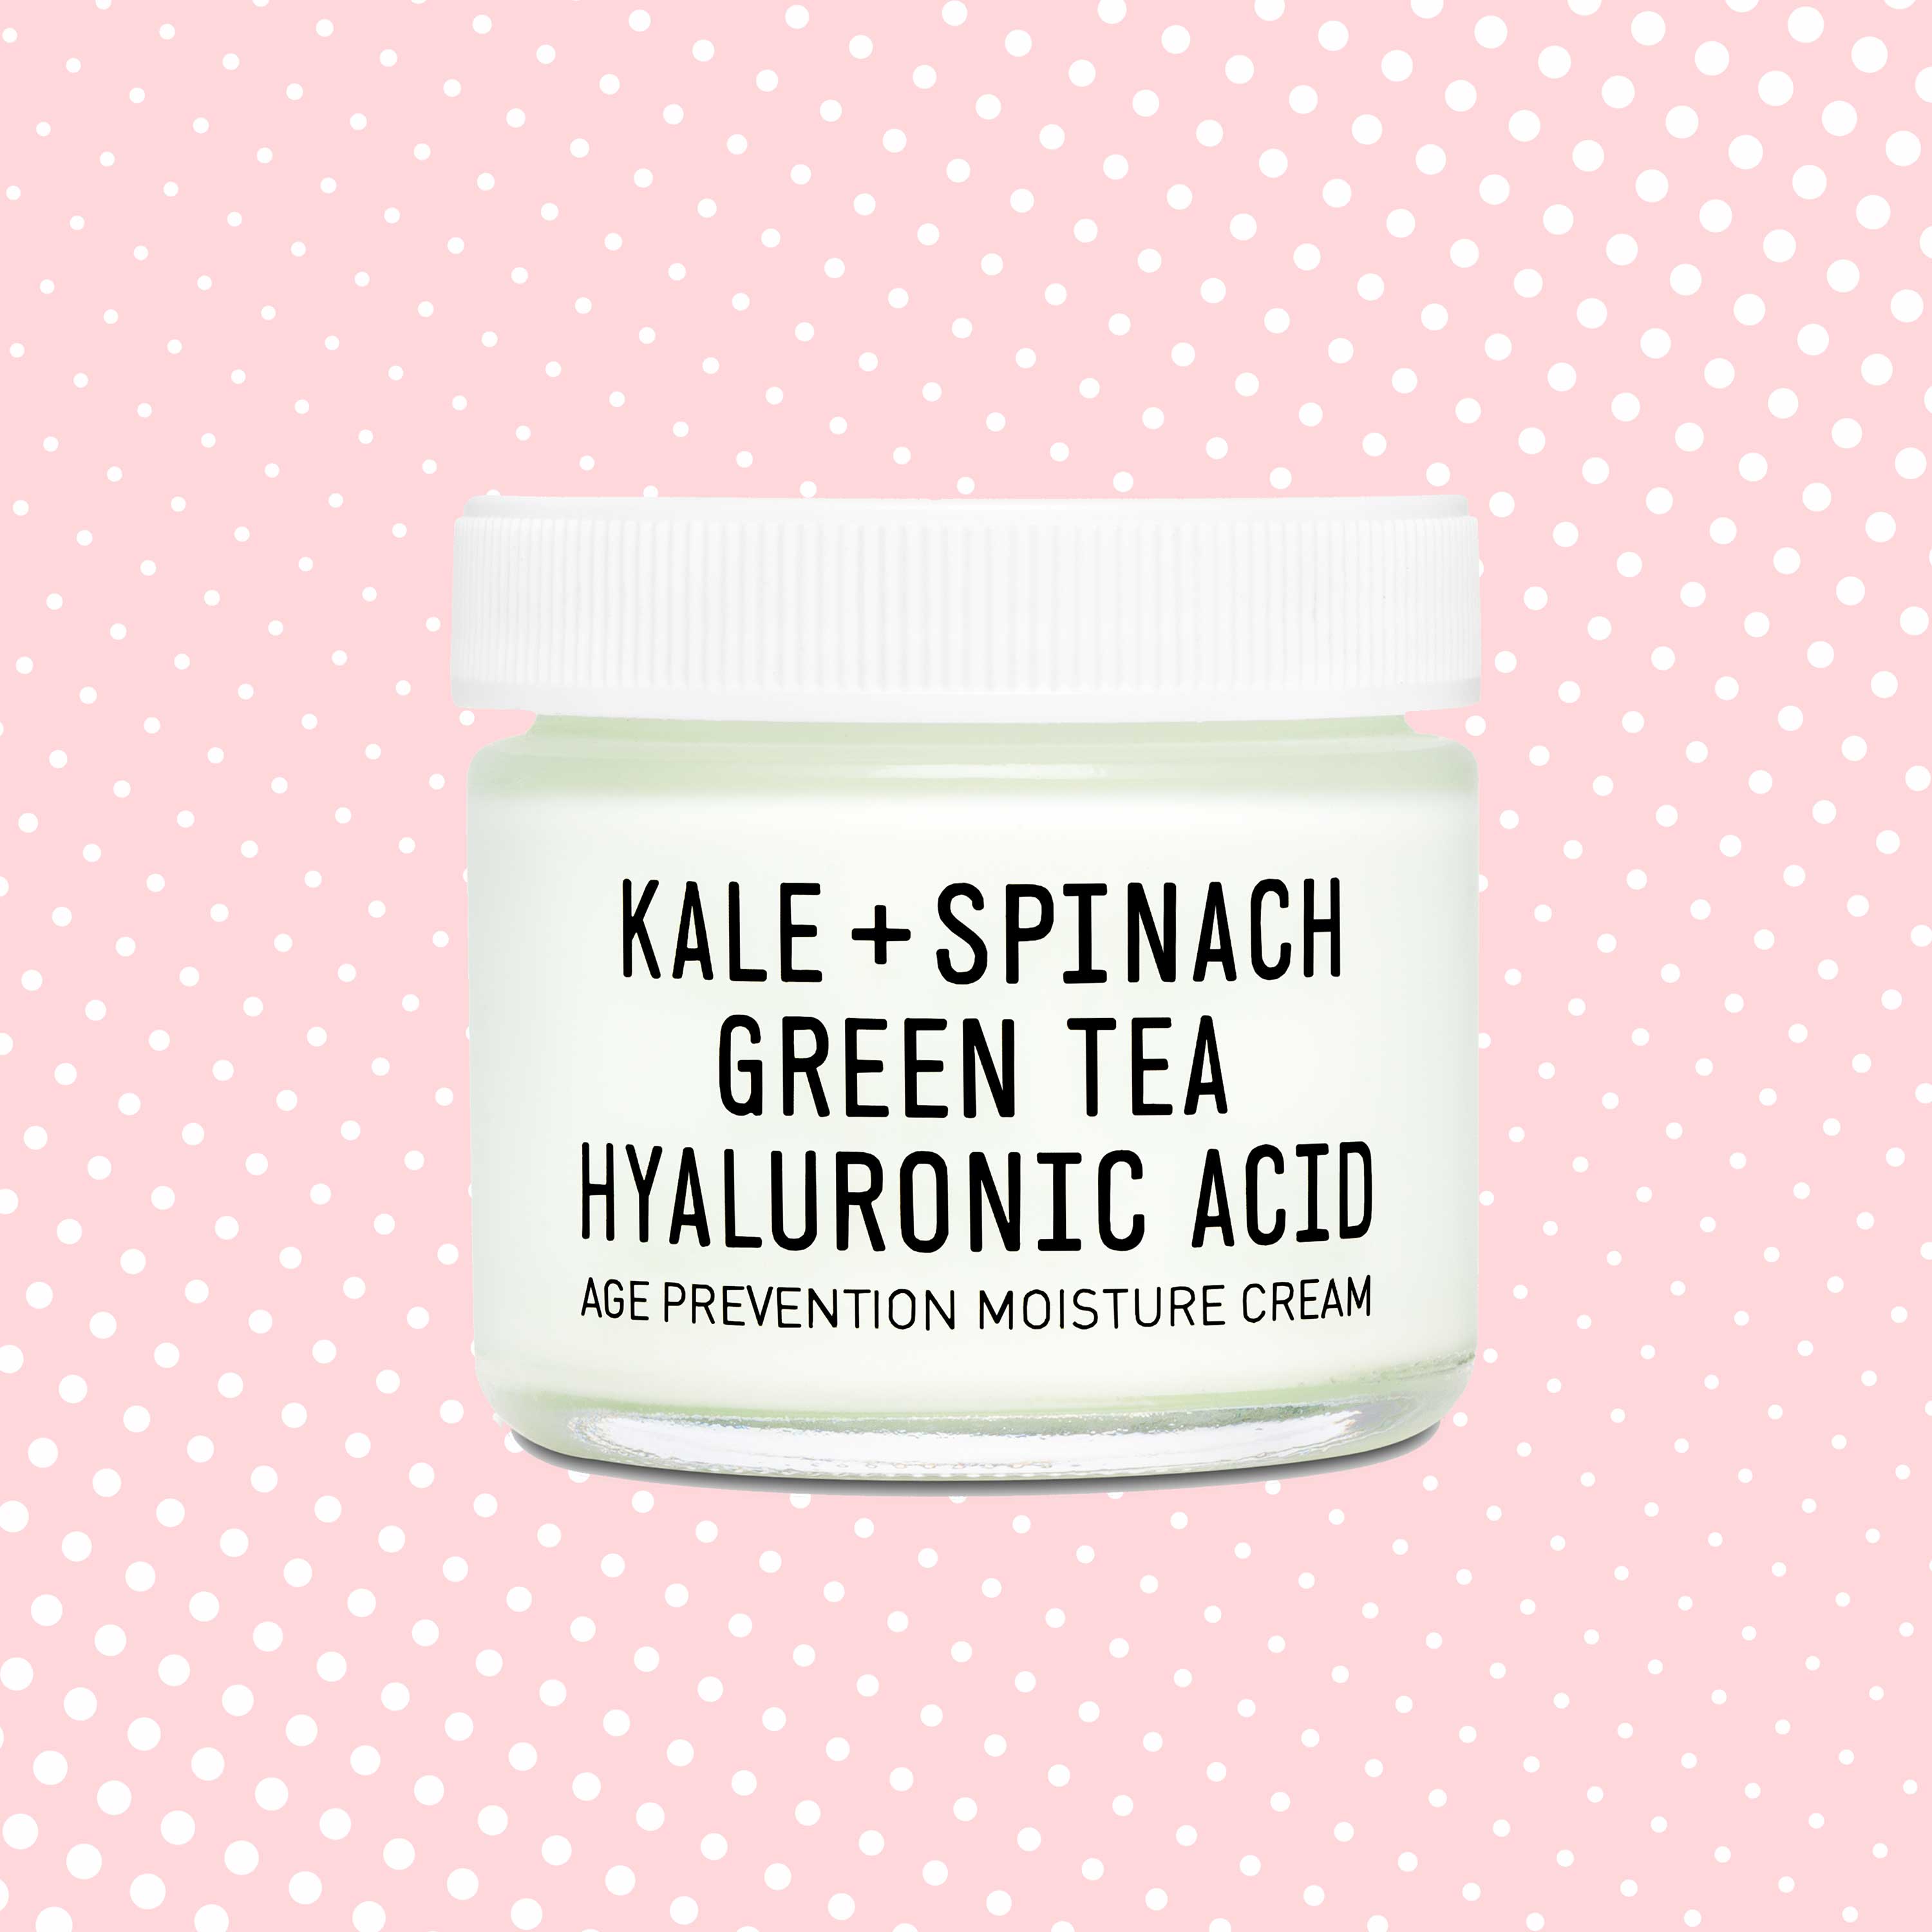 9 Super Gentle Moisturizers That Are A Perfect Match For Sensitive Skin
